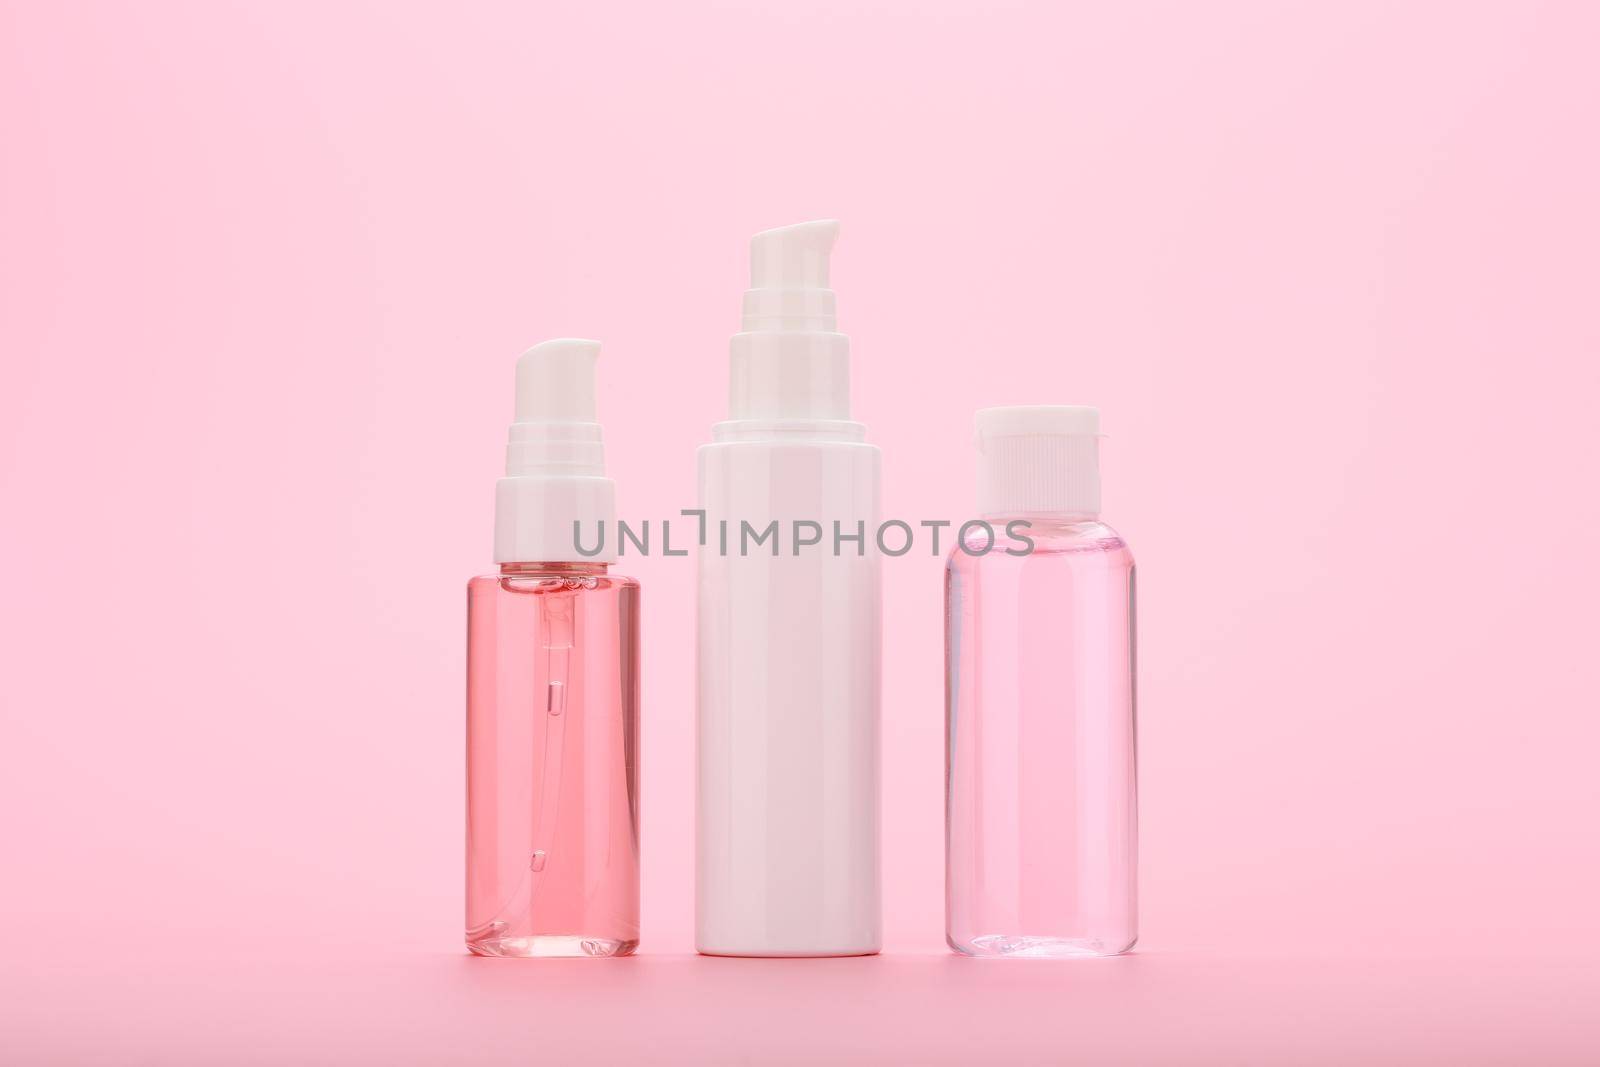 Cleaning foam, face cream and skin lotion against pink background. Concept of daily skin care or anti aging treatment